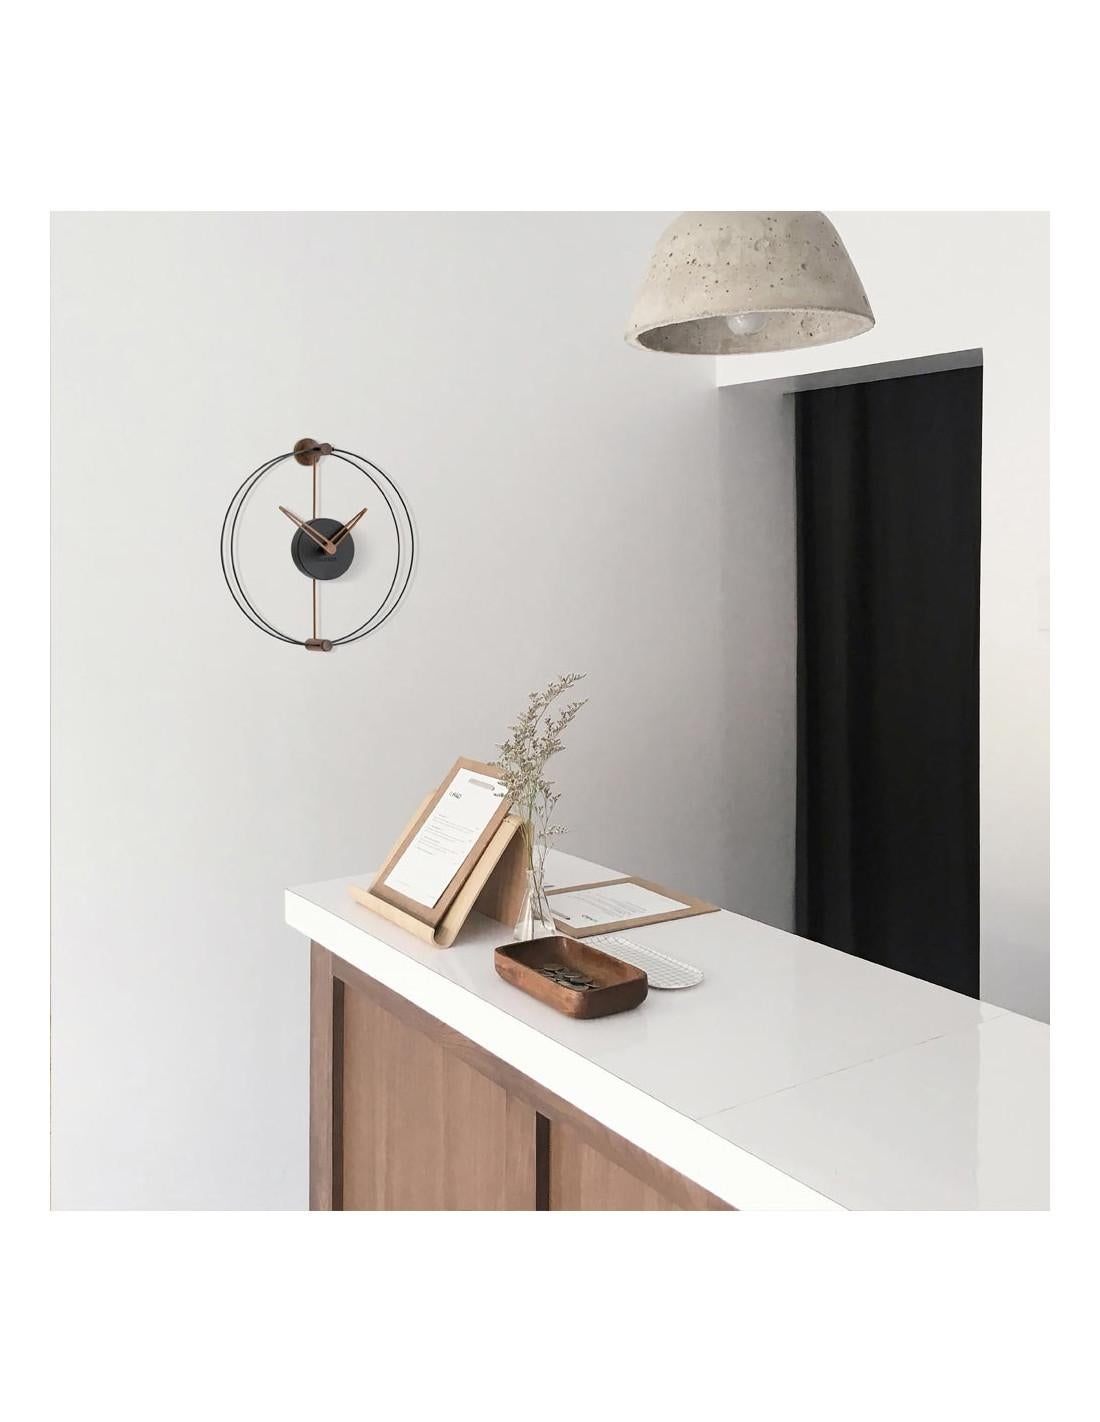 The modern Nano clock has an avant-garde design with a Nordic air, combining walnut wood or oak finish with black and white colors.
Nano wall clock: Hands and details in walnut or oak finish, box in black or white polystyrene.
Each clock is a